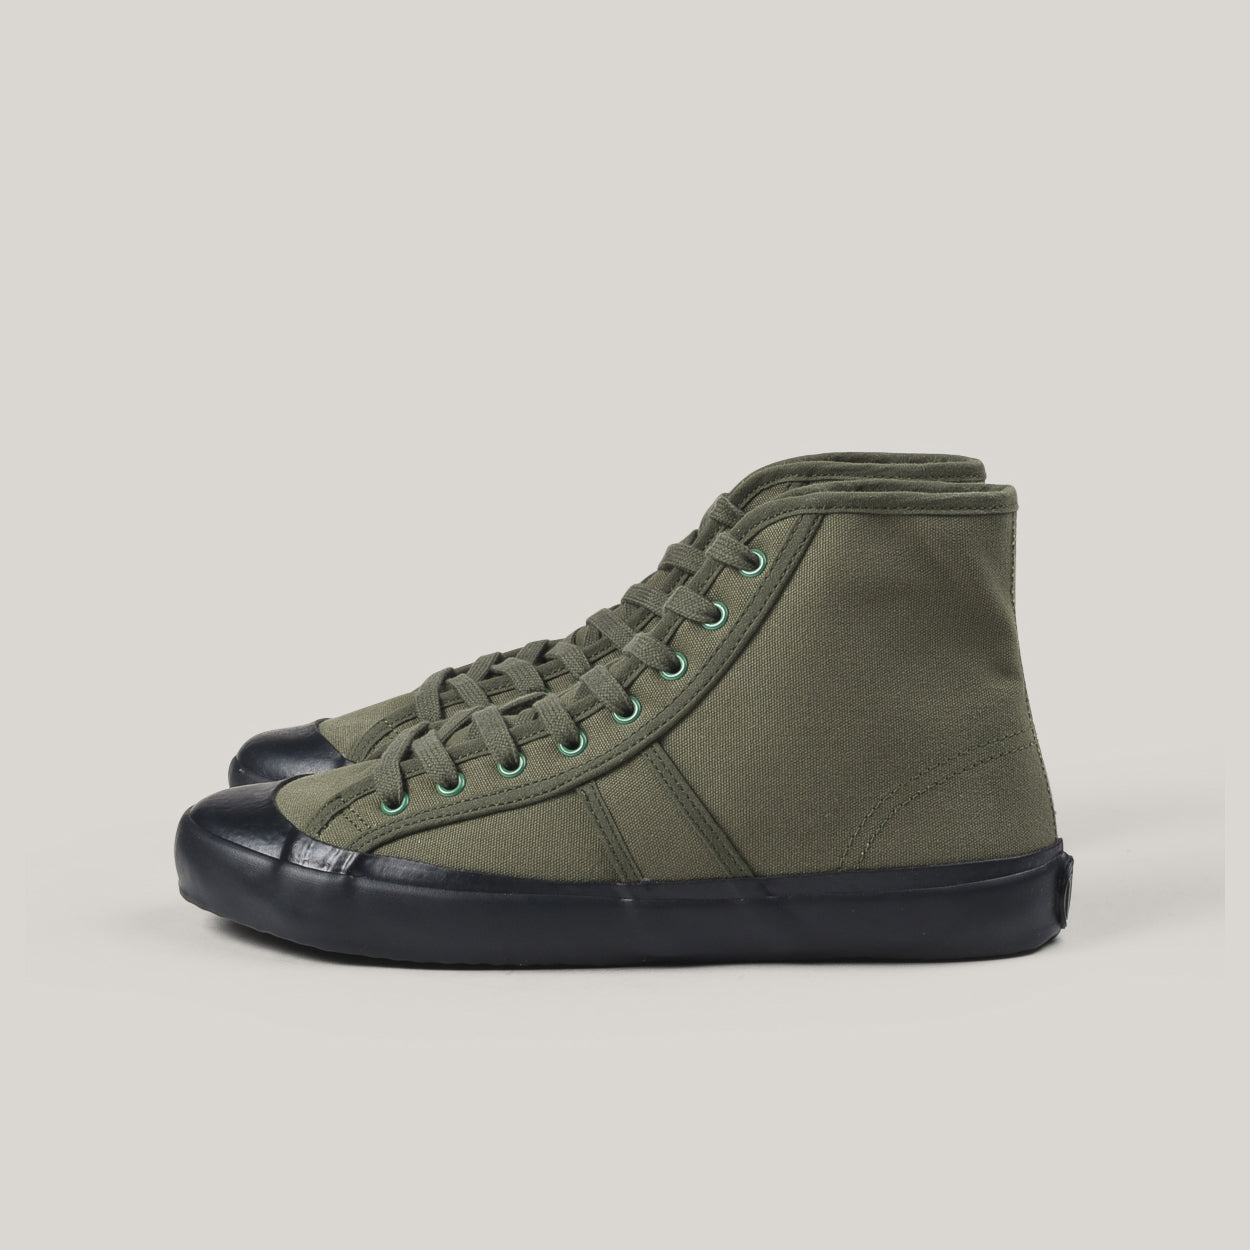 US RUBBER LOT 009 - ARMY GREEN/BLACK